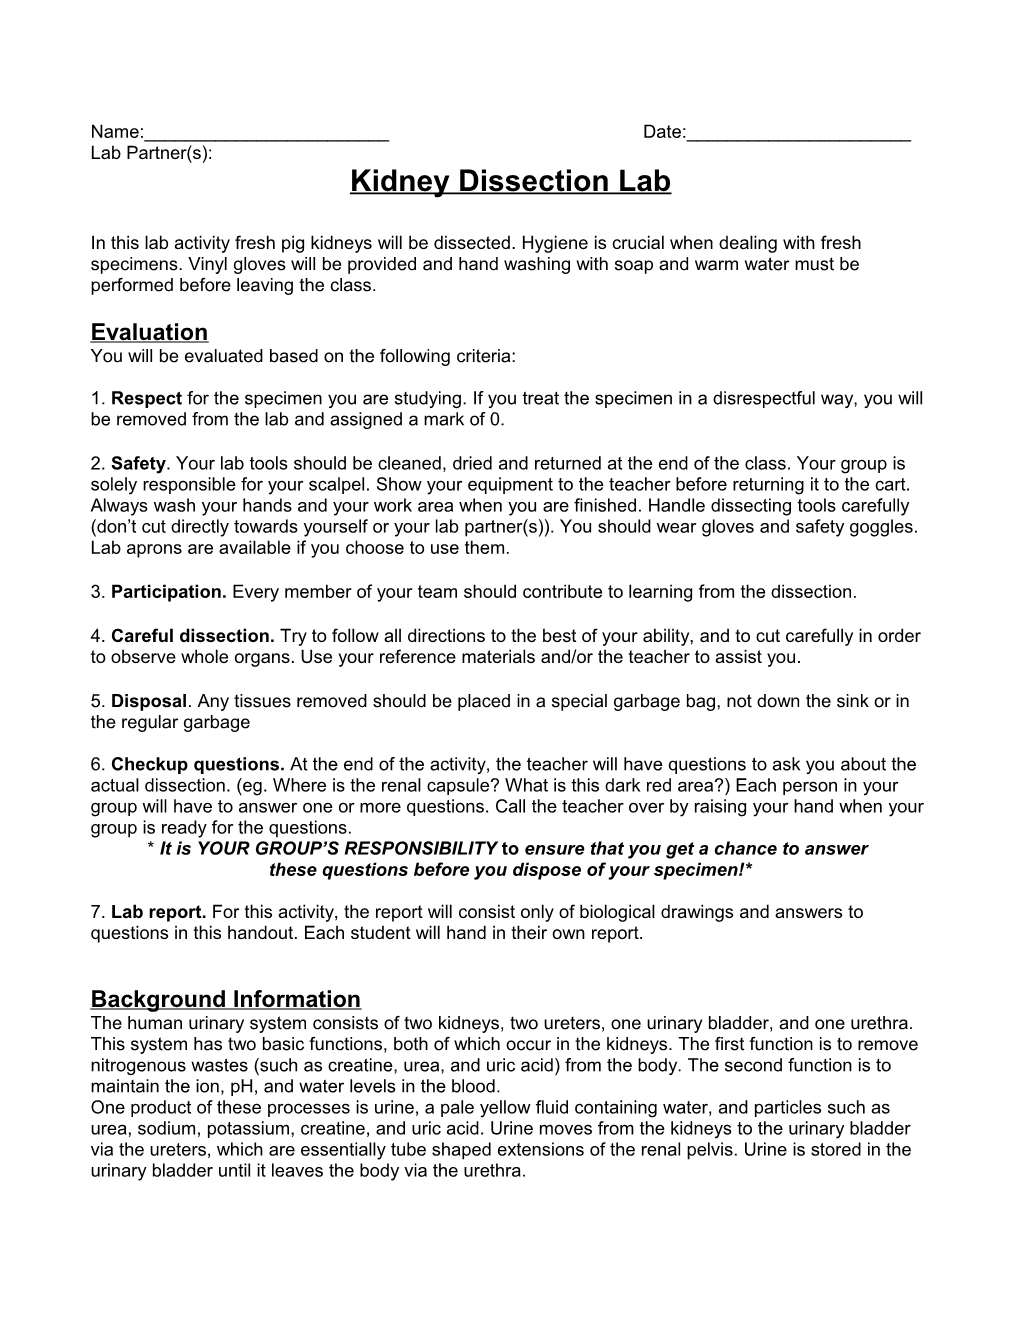 Kidney Dissection Lab